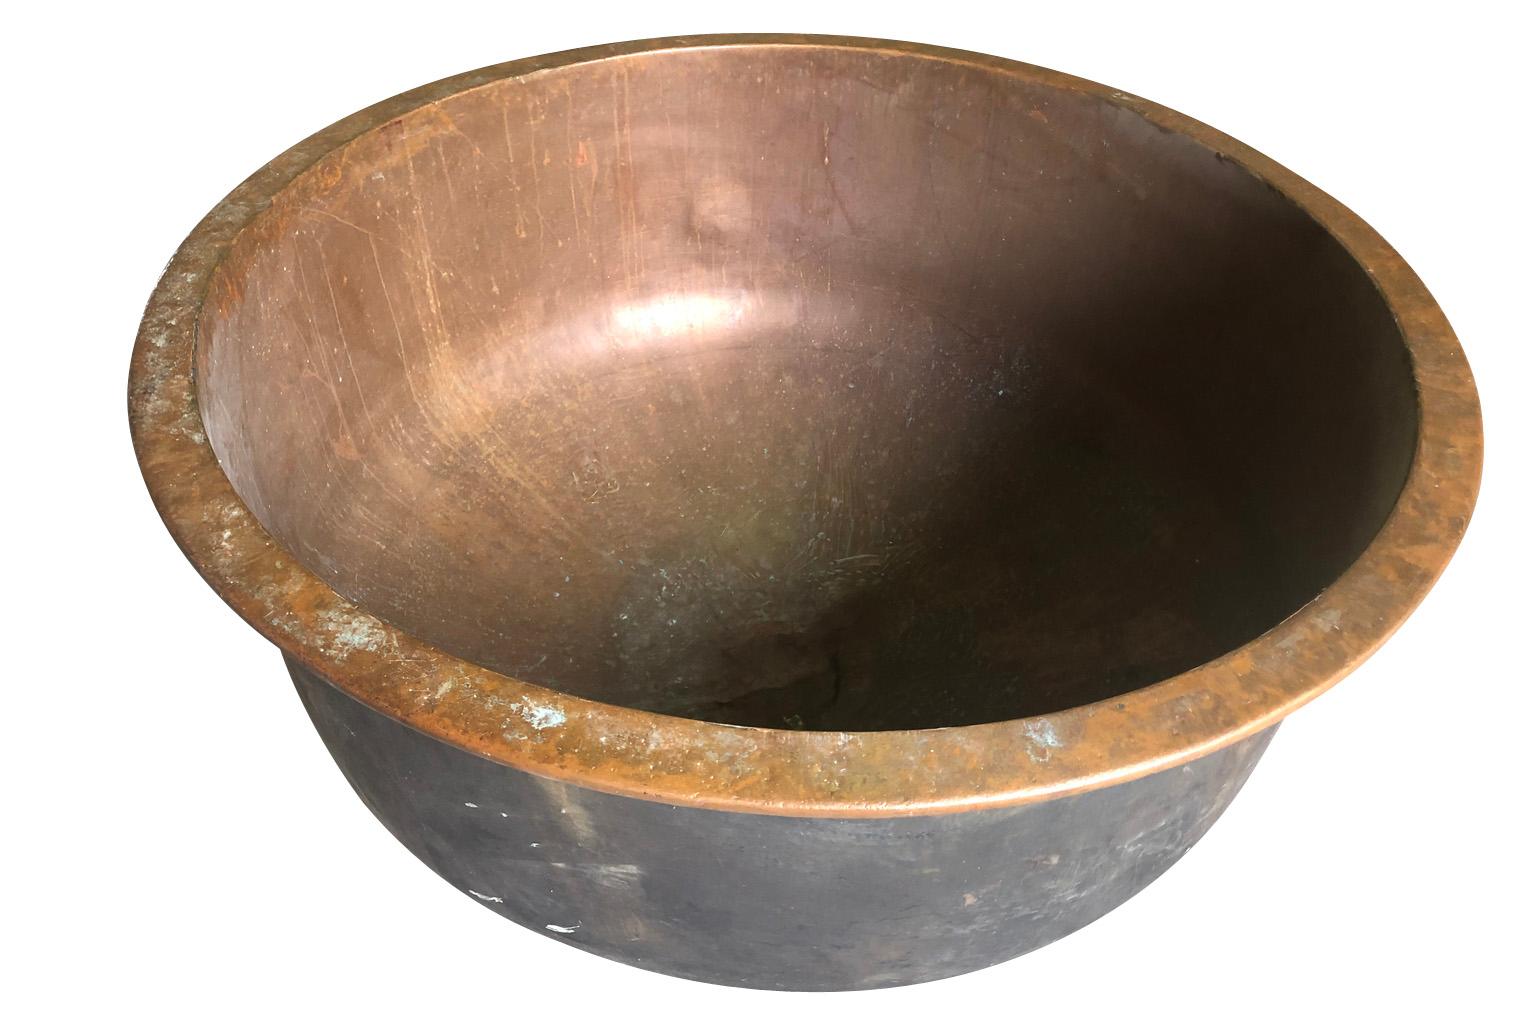 An outstanding and very grand scale Vat - Kettle - wonderfully crafted from very heavy gauge copper.  Vats such as this one were originally used in cheese making.  A sensational piece for any garden - whether converted into a water feature, a large